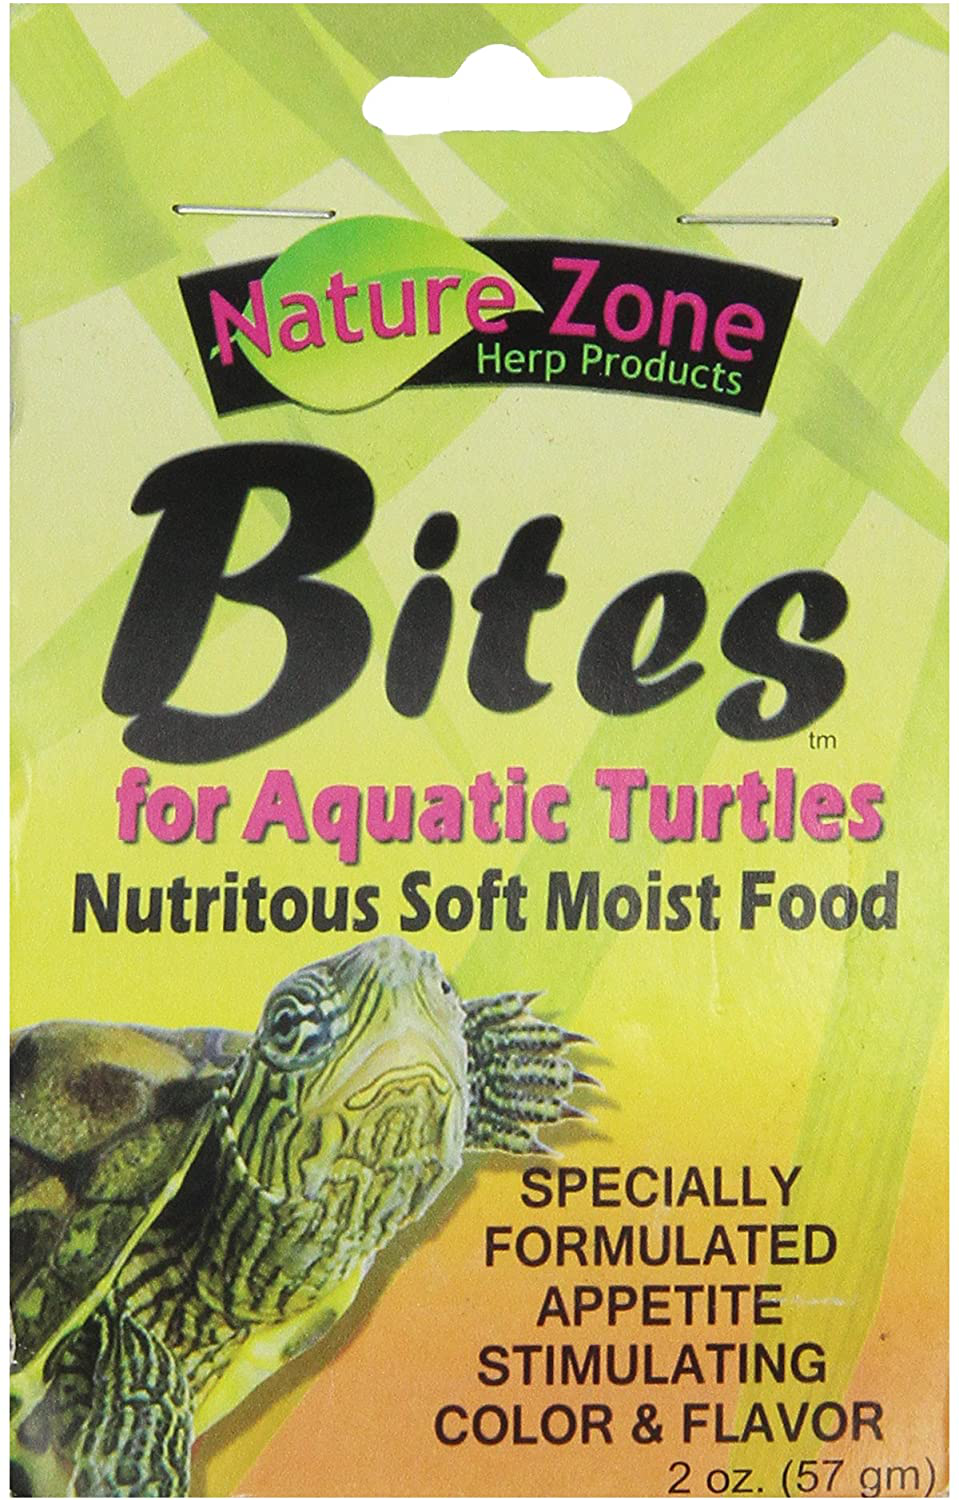 Nature Zone Snz54670 Bites Soft Moist Food for Aquatic Turtles, 2-Ounce